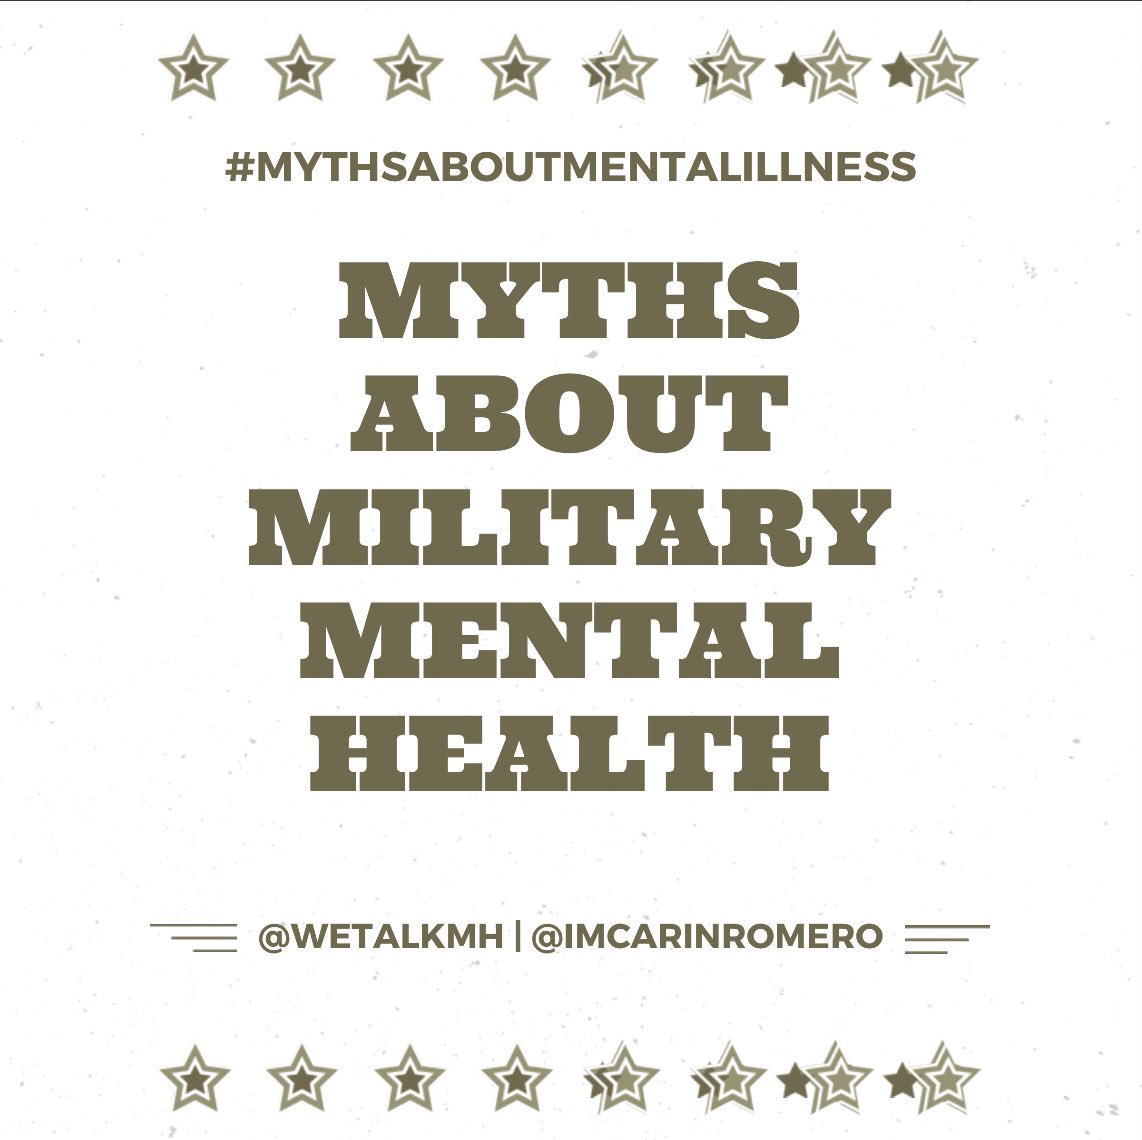 The video we’re posting on Friday touches on #PTSD, #TBIs and #MilitaryMentalHealth.

So for #MythsAboutMentalIllness Monday, let’s de-bunk some of the common misconceptions that still face military personnel and their mental health/mental illnesses.

#WeTalkMH #MHAP